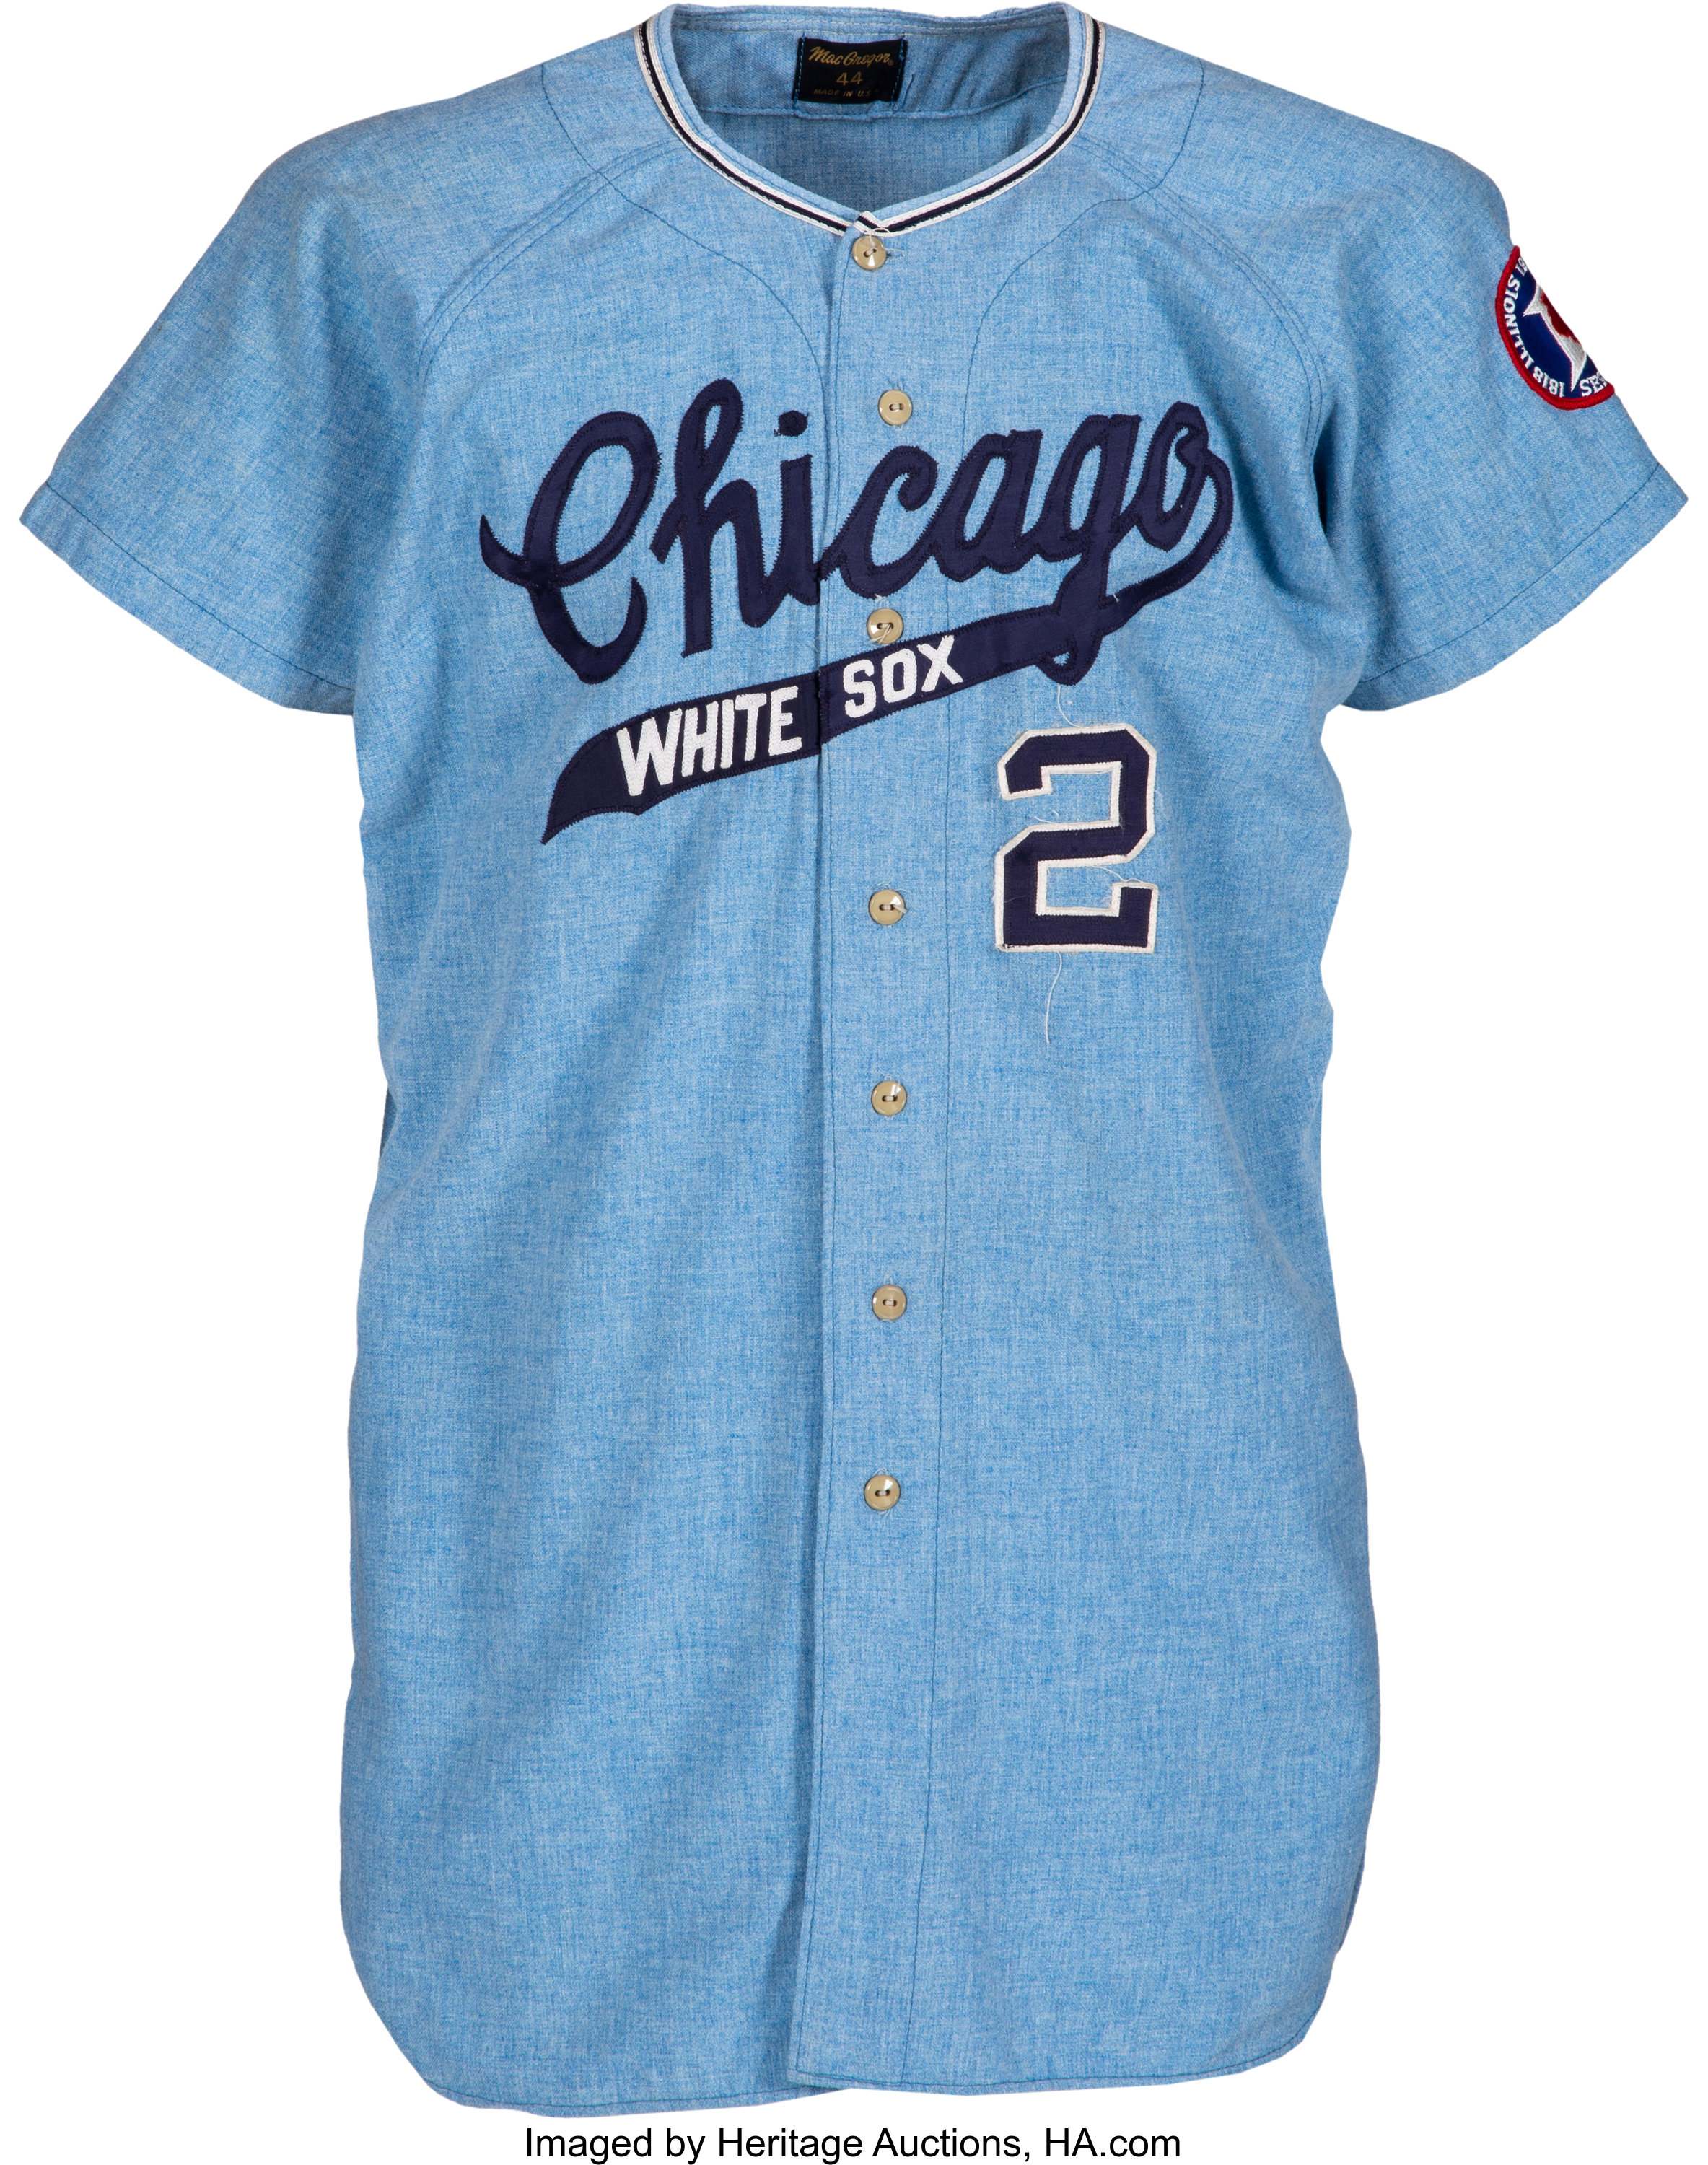 1968 chicago white sox jersey